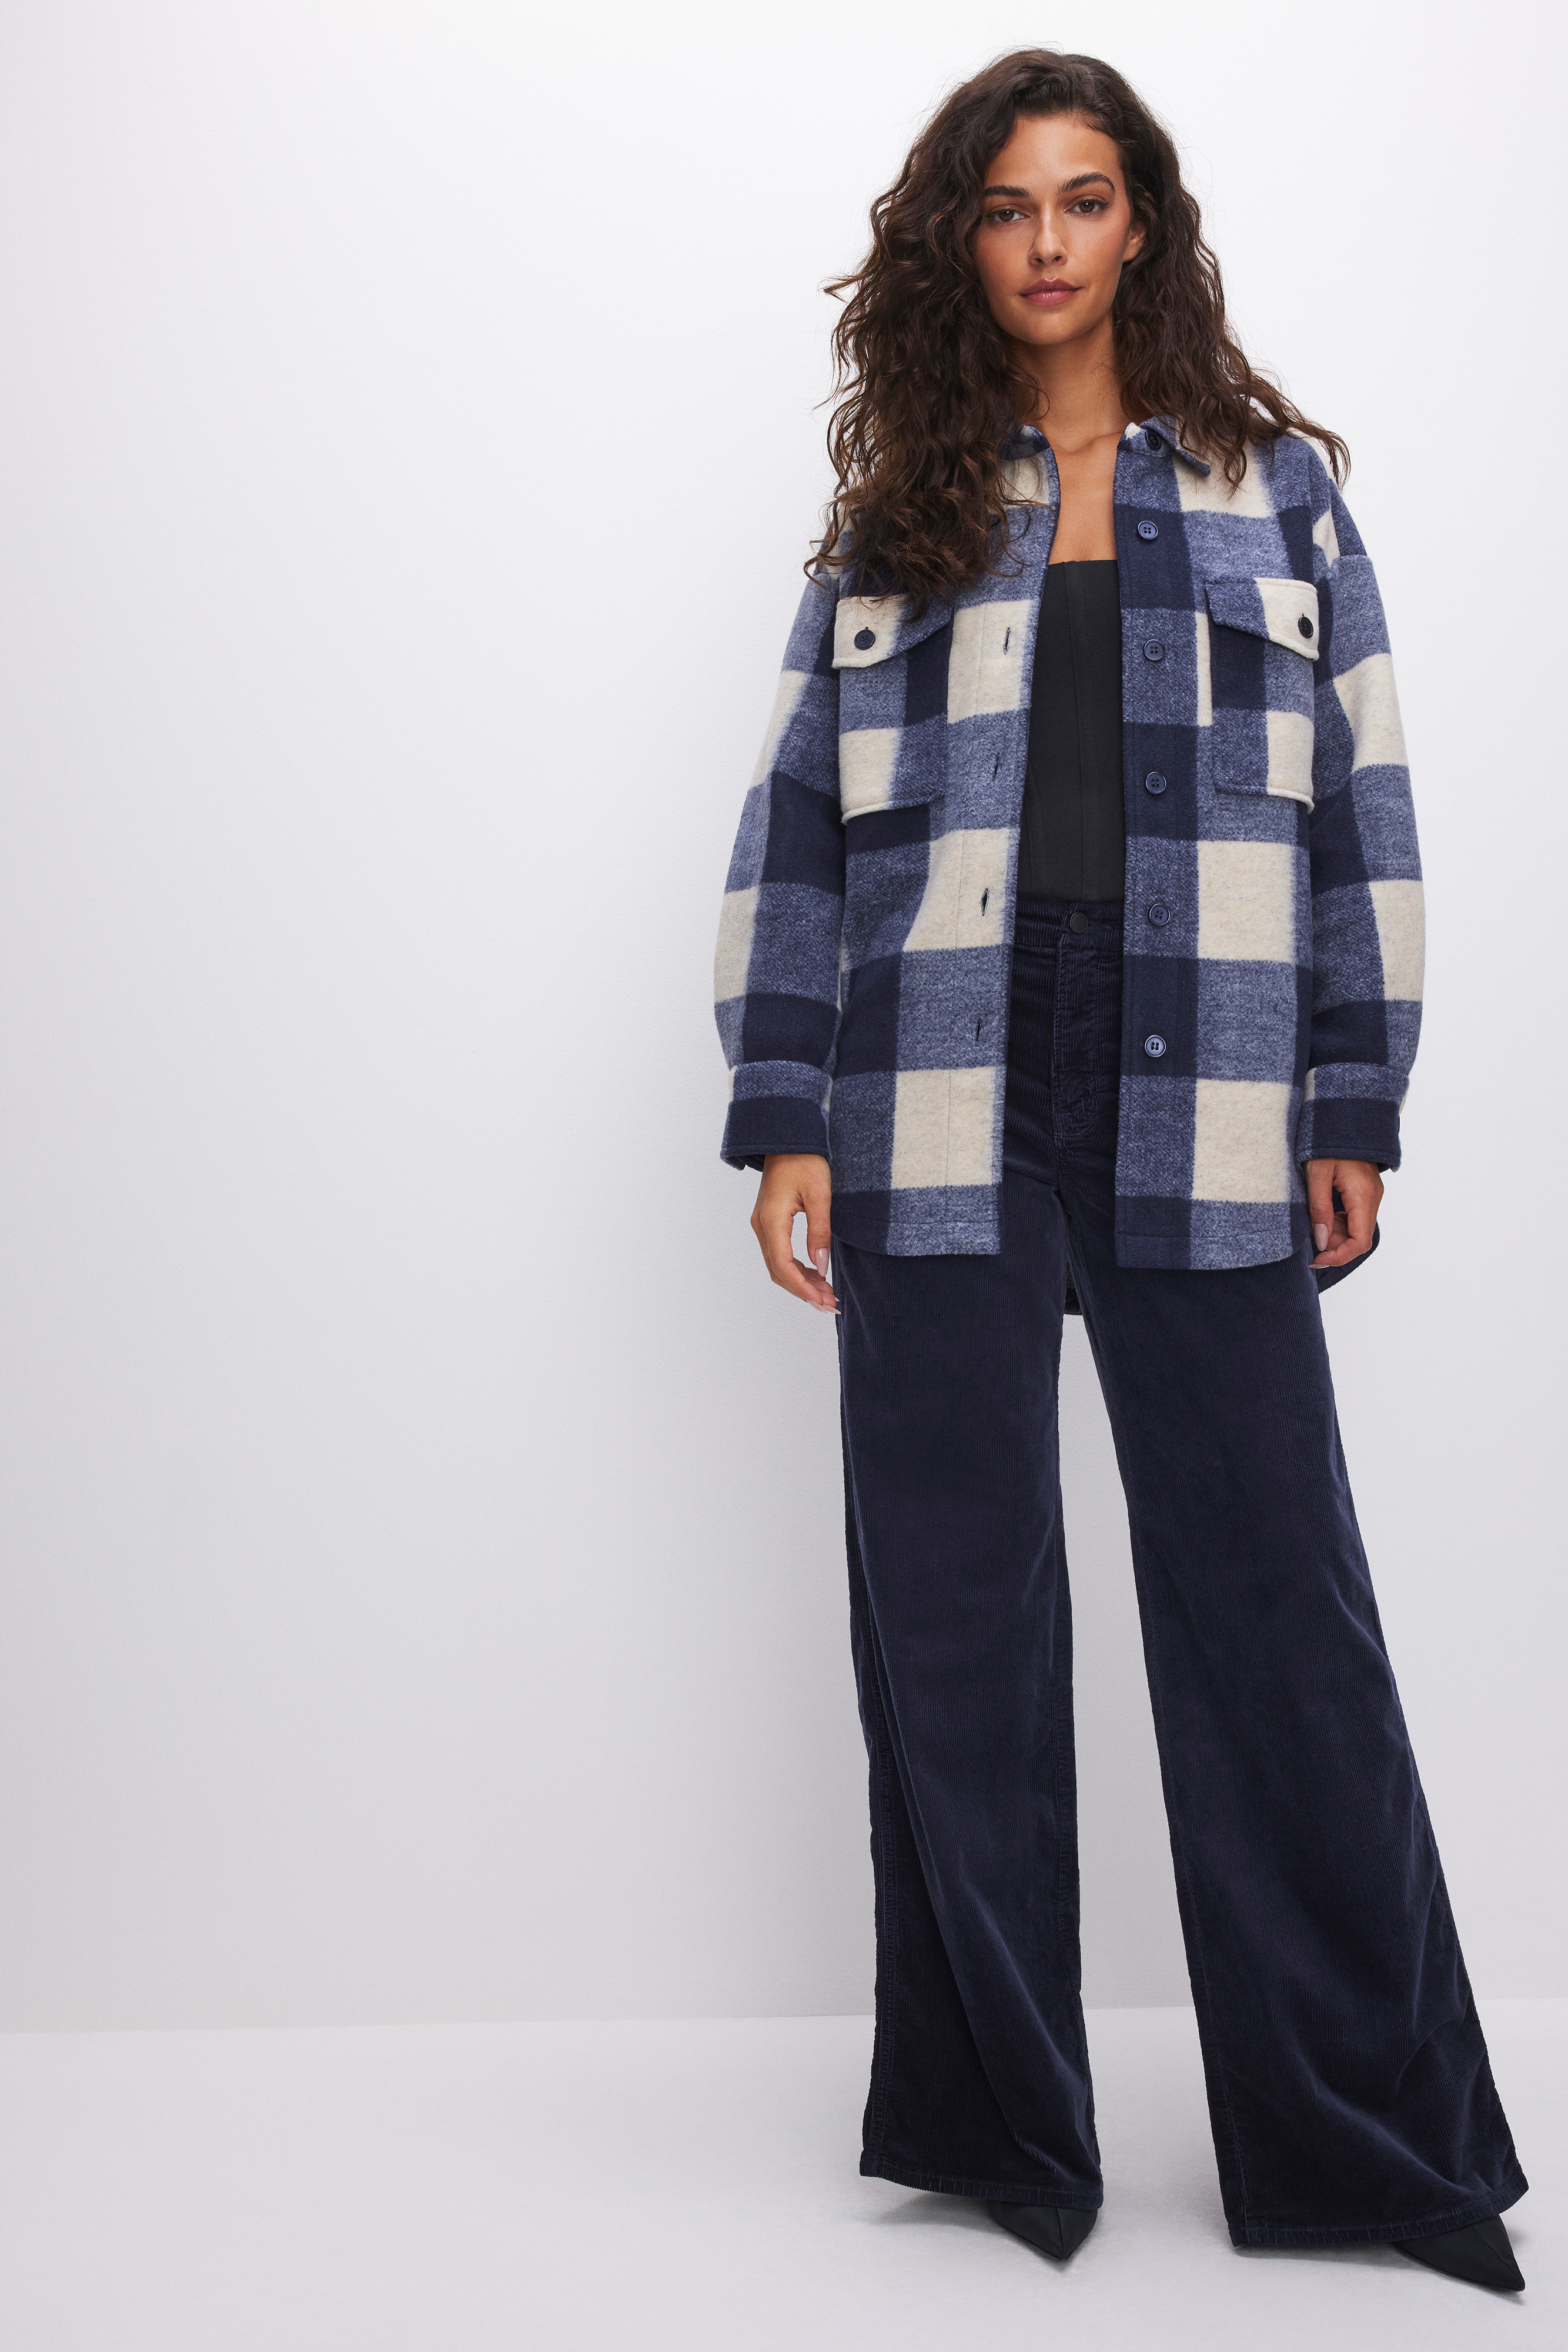 Styled with FELTED SHACKET | INK BLUE PLAID